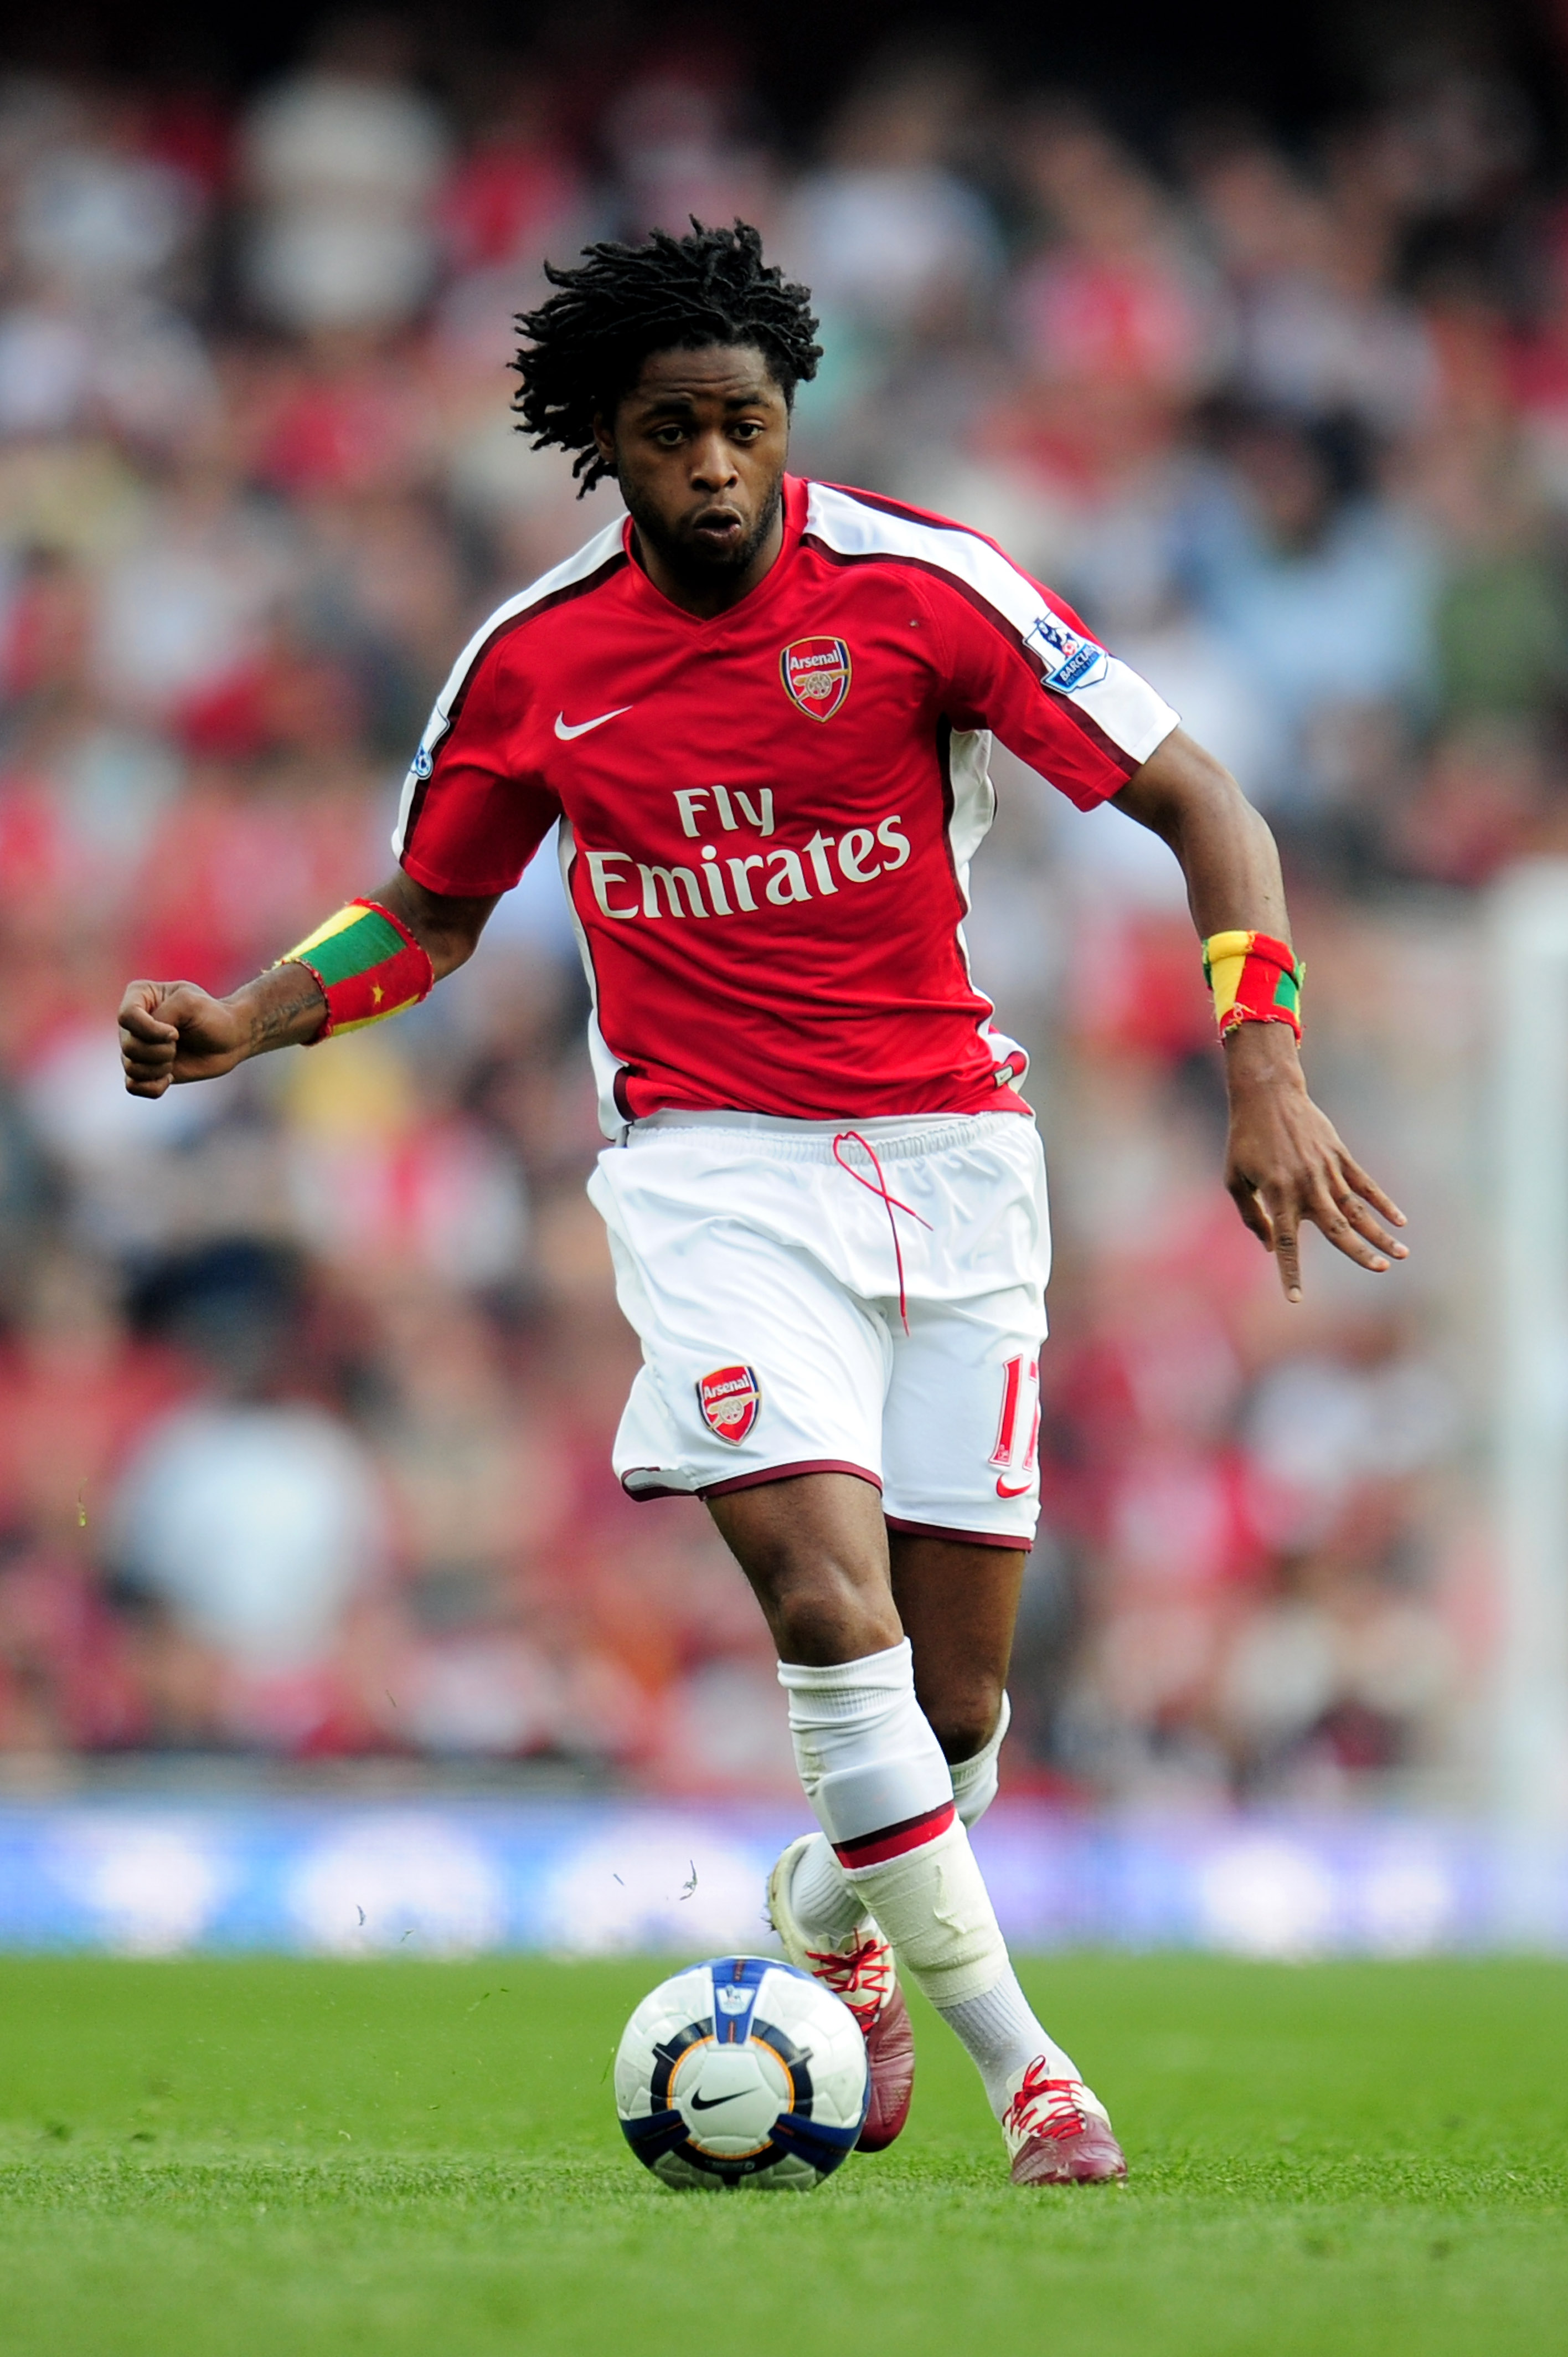 LONDON, ENGLAND - APRIL 24:  Alex Song of Arsenal runs with the ball during the Barclays Premier League match between Arsenal and Manchester City at the Emirates Stadium on April 24, 2010 in London, England.  (Photo by Shaun Botterill/Getty Images)